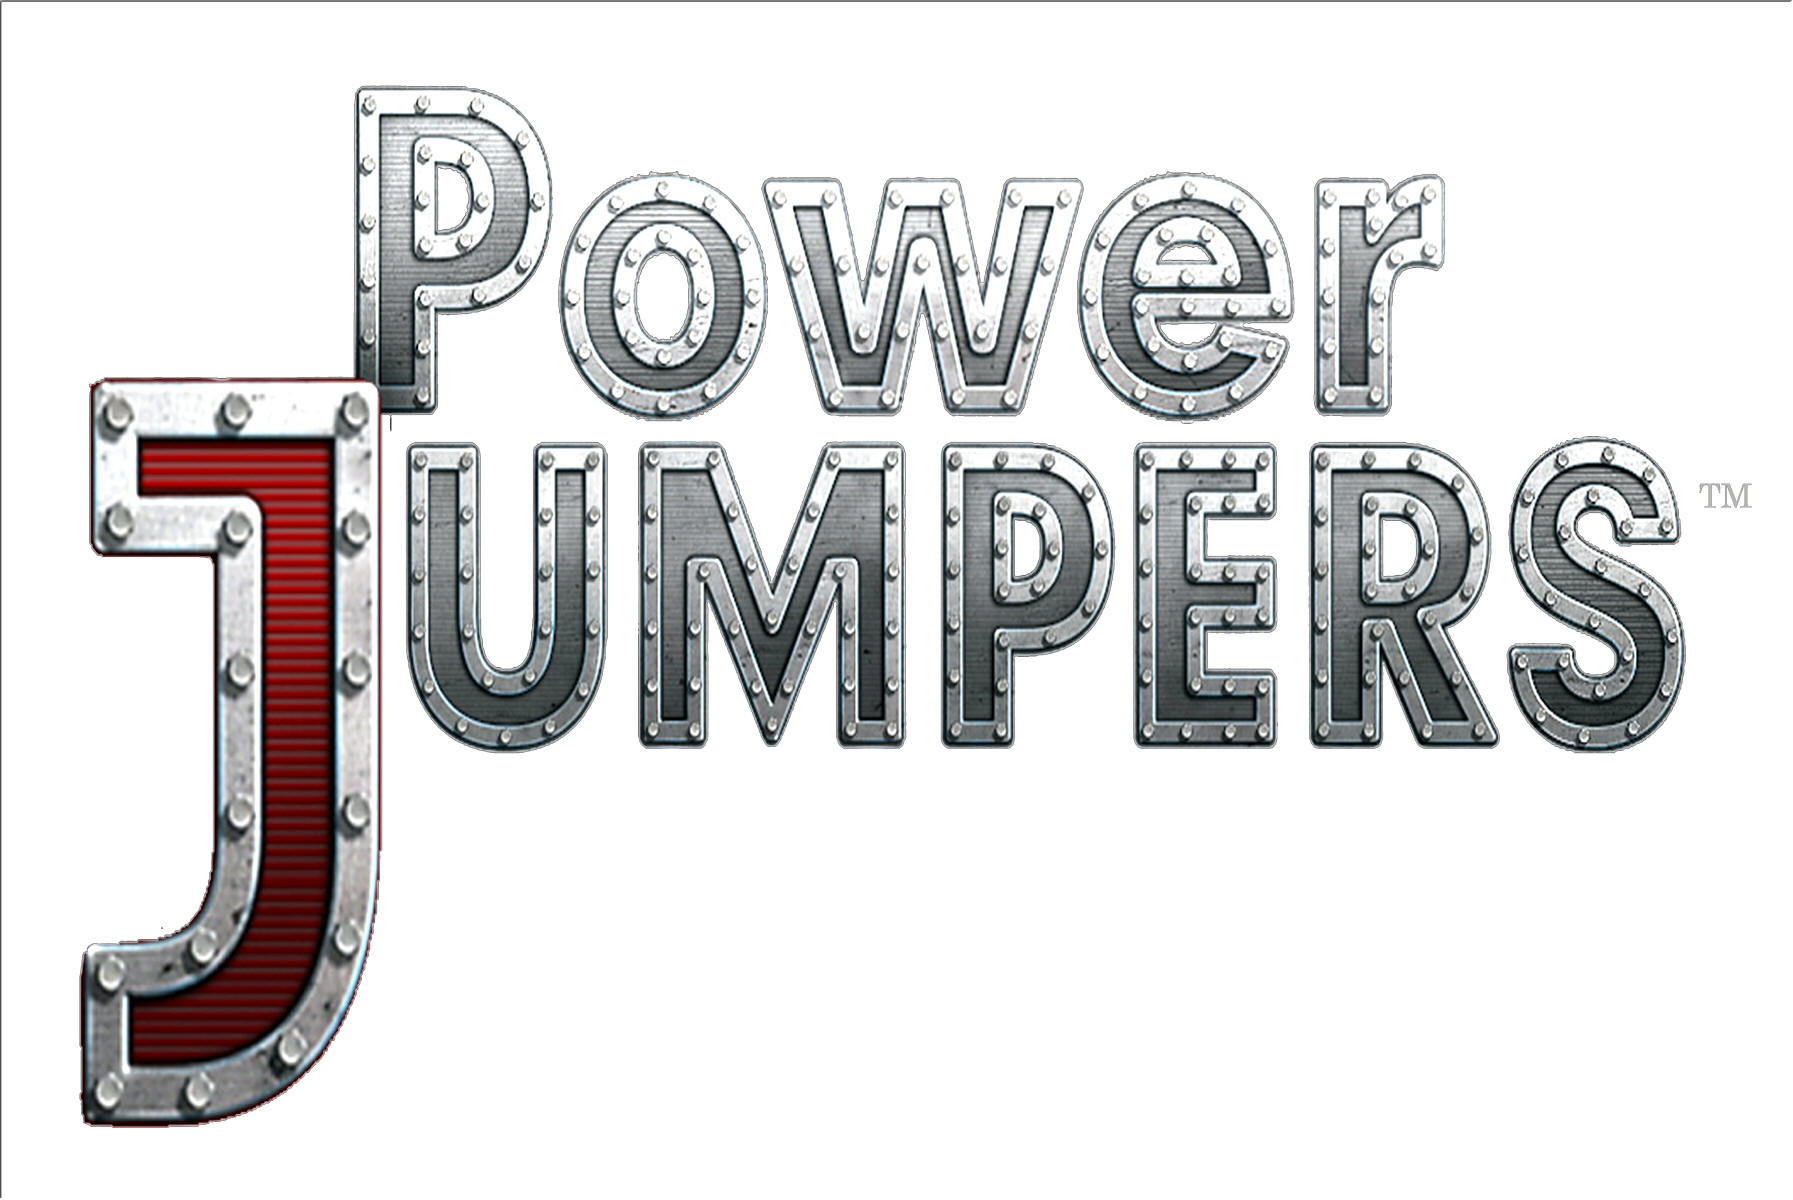 Power Jumpers, jump boots, rebound exercise boots, mini trampolines, lauren brenner, jump shoes, power jumper boots for aerobics